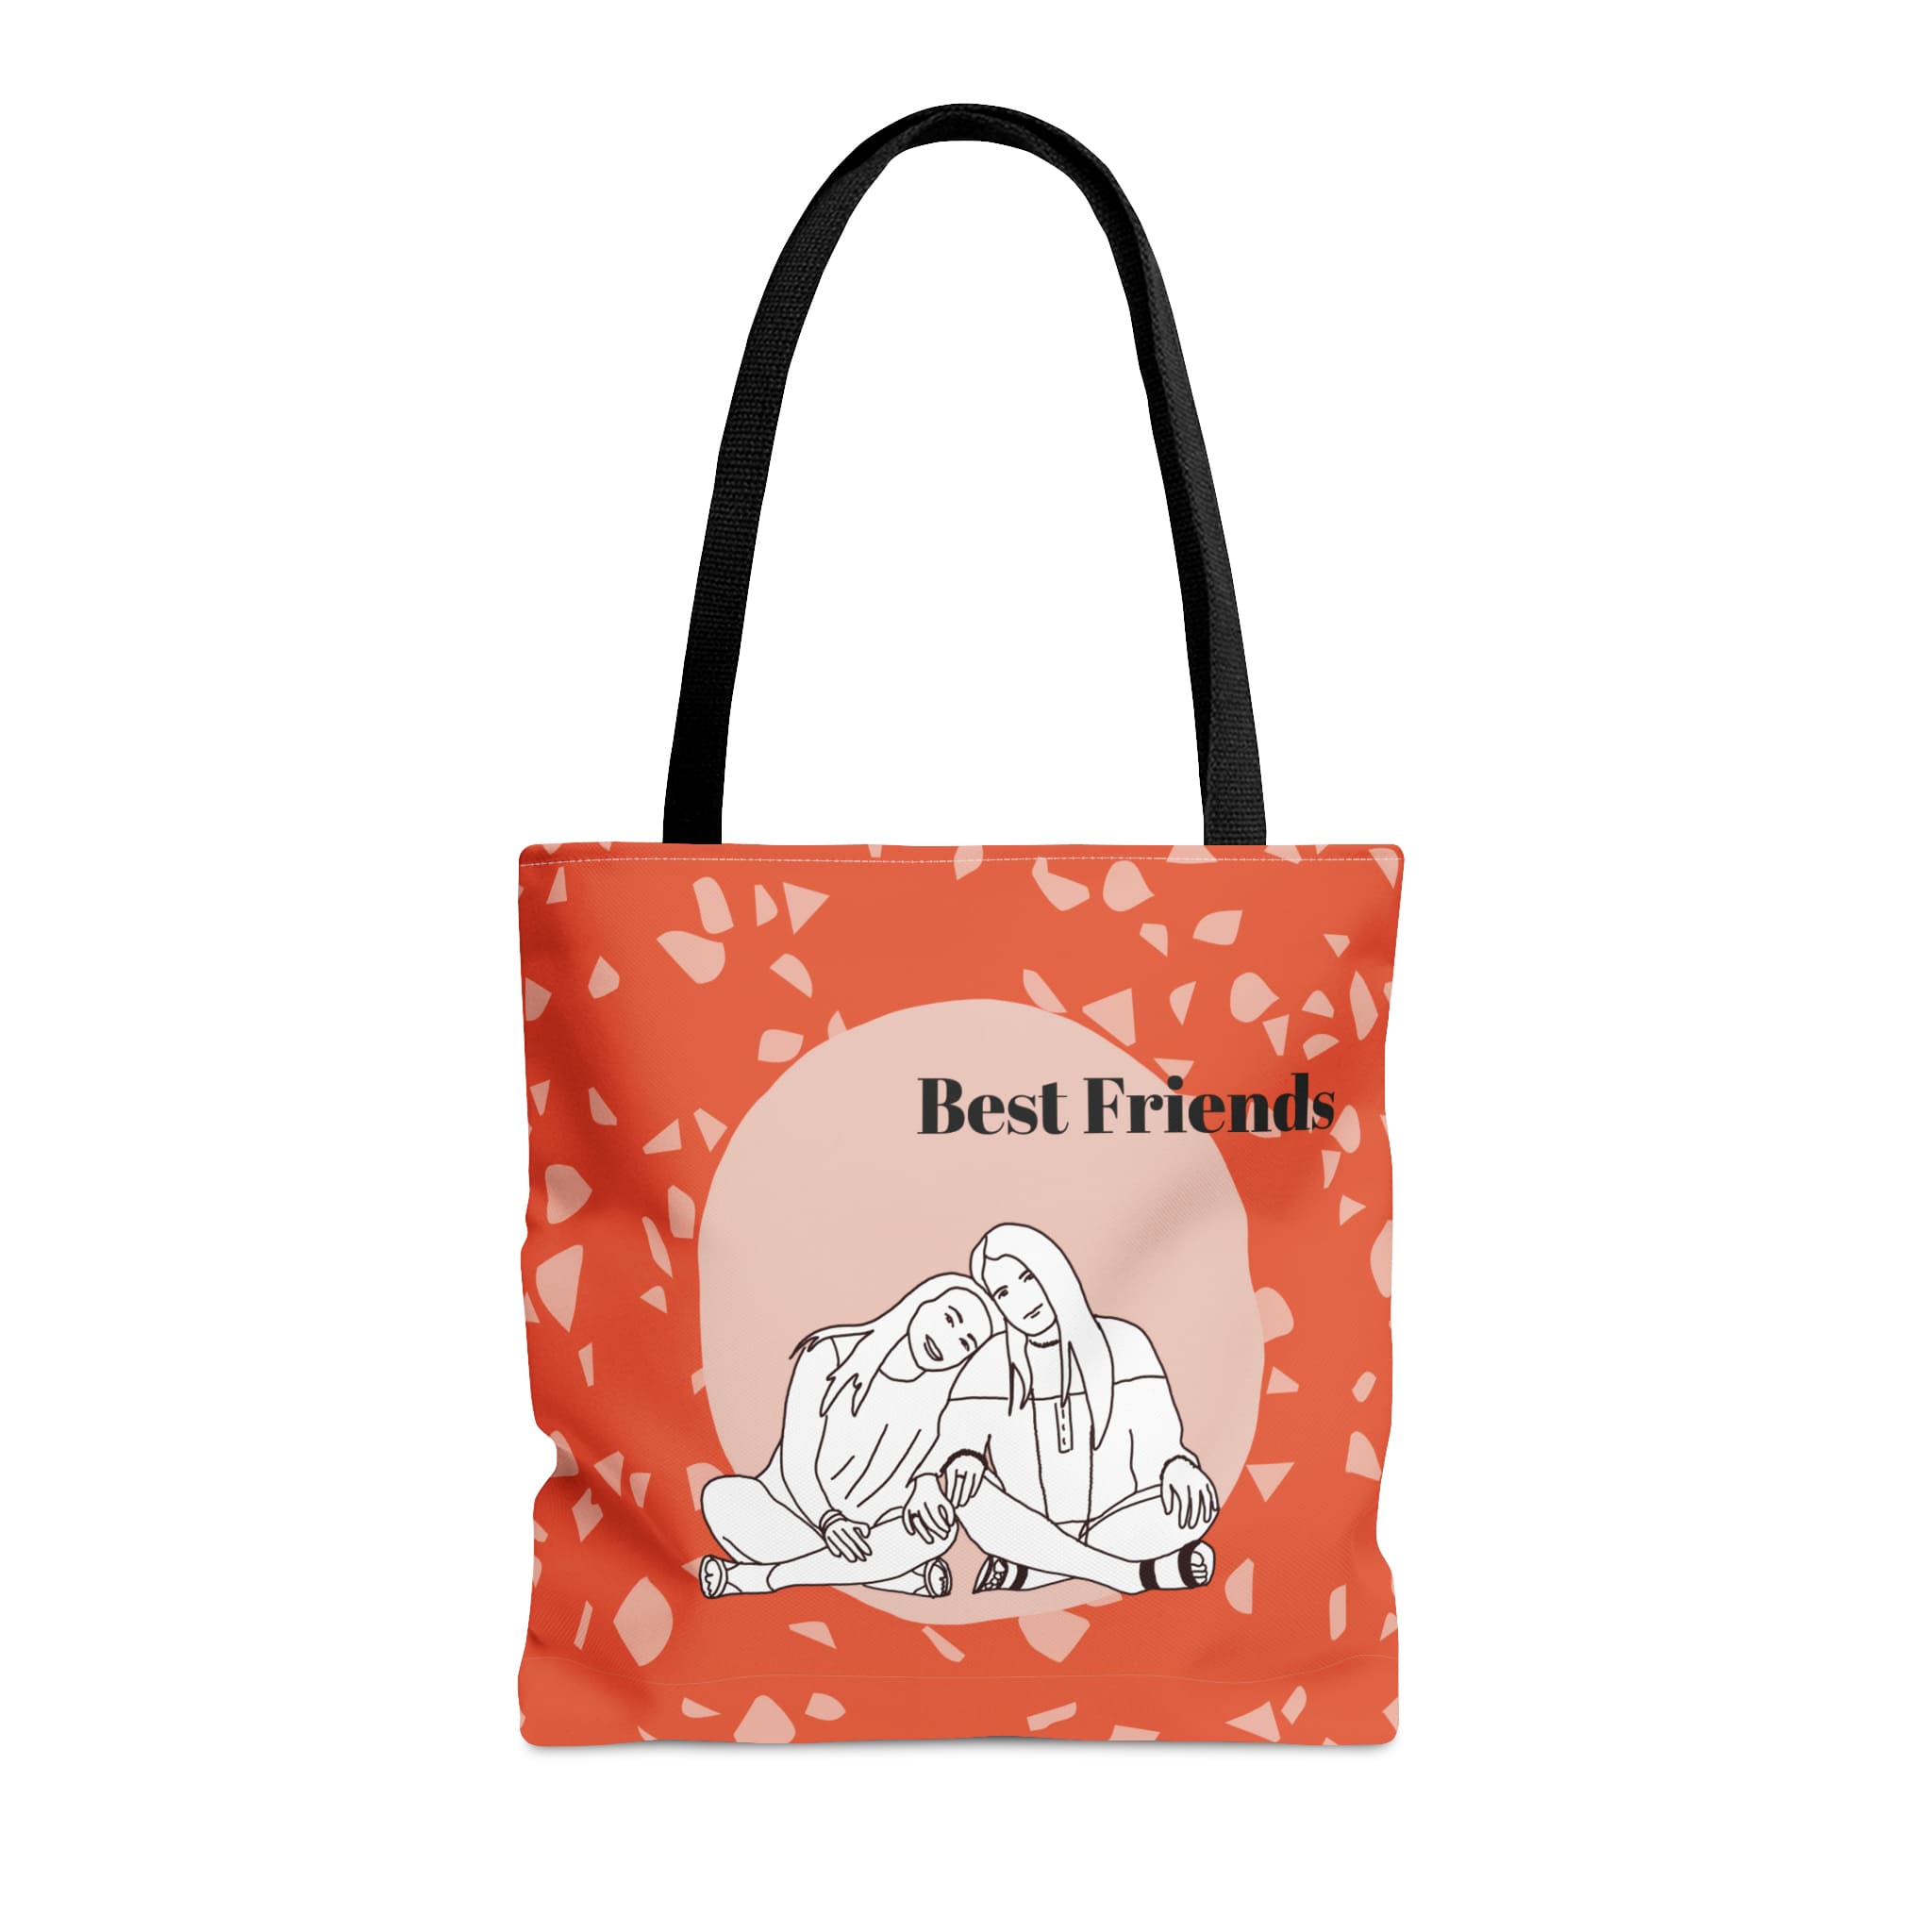 custom matching tote bags for best friends with their line art portrait illustrtation from photo on colorful terrazzo patterned background .jpg